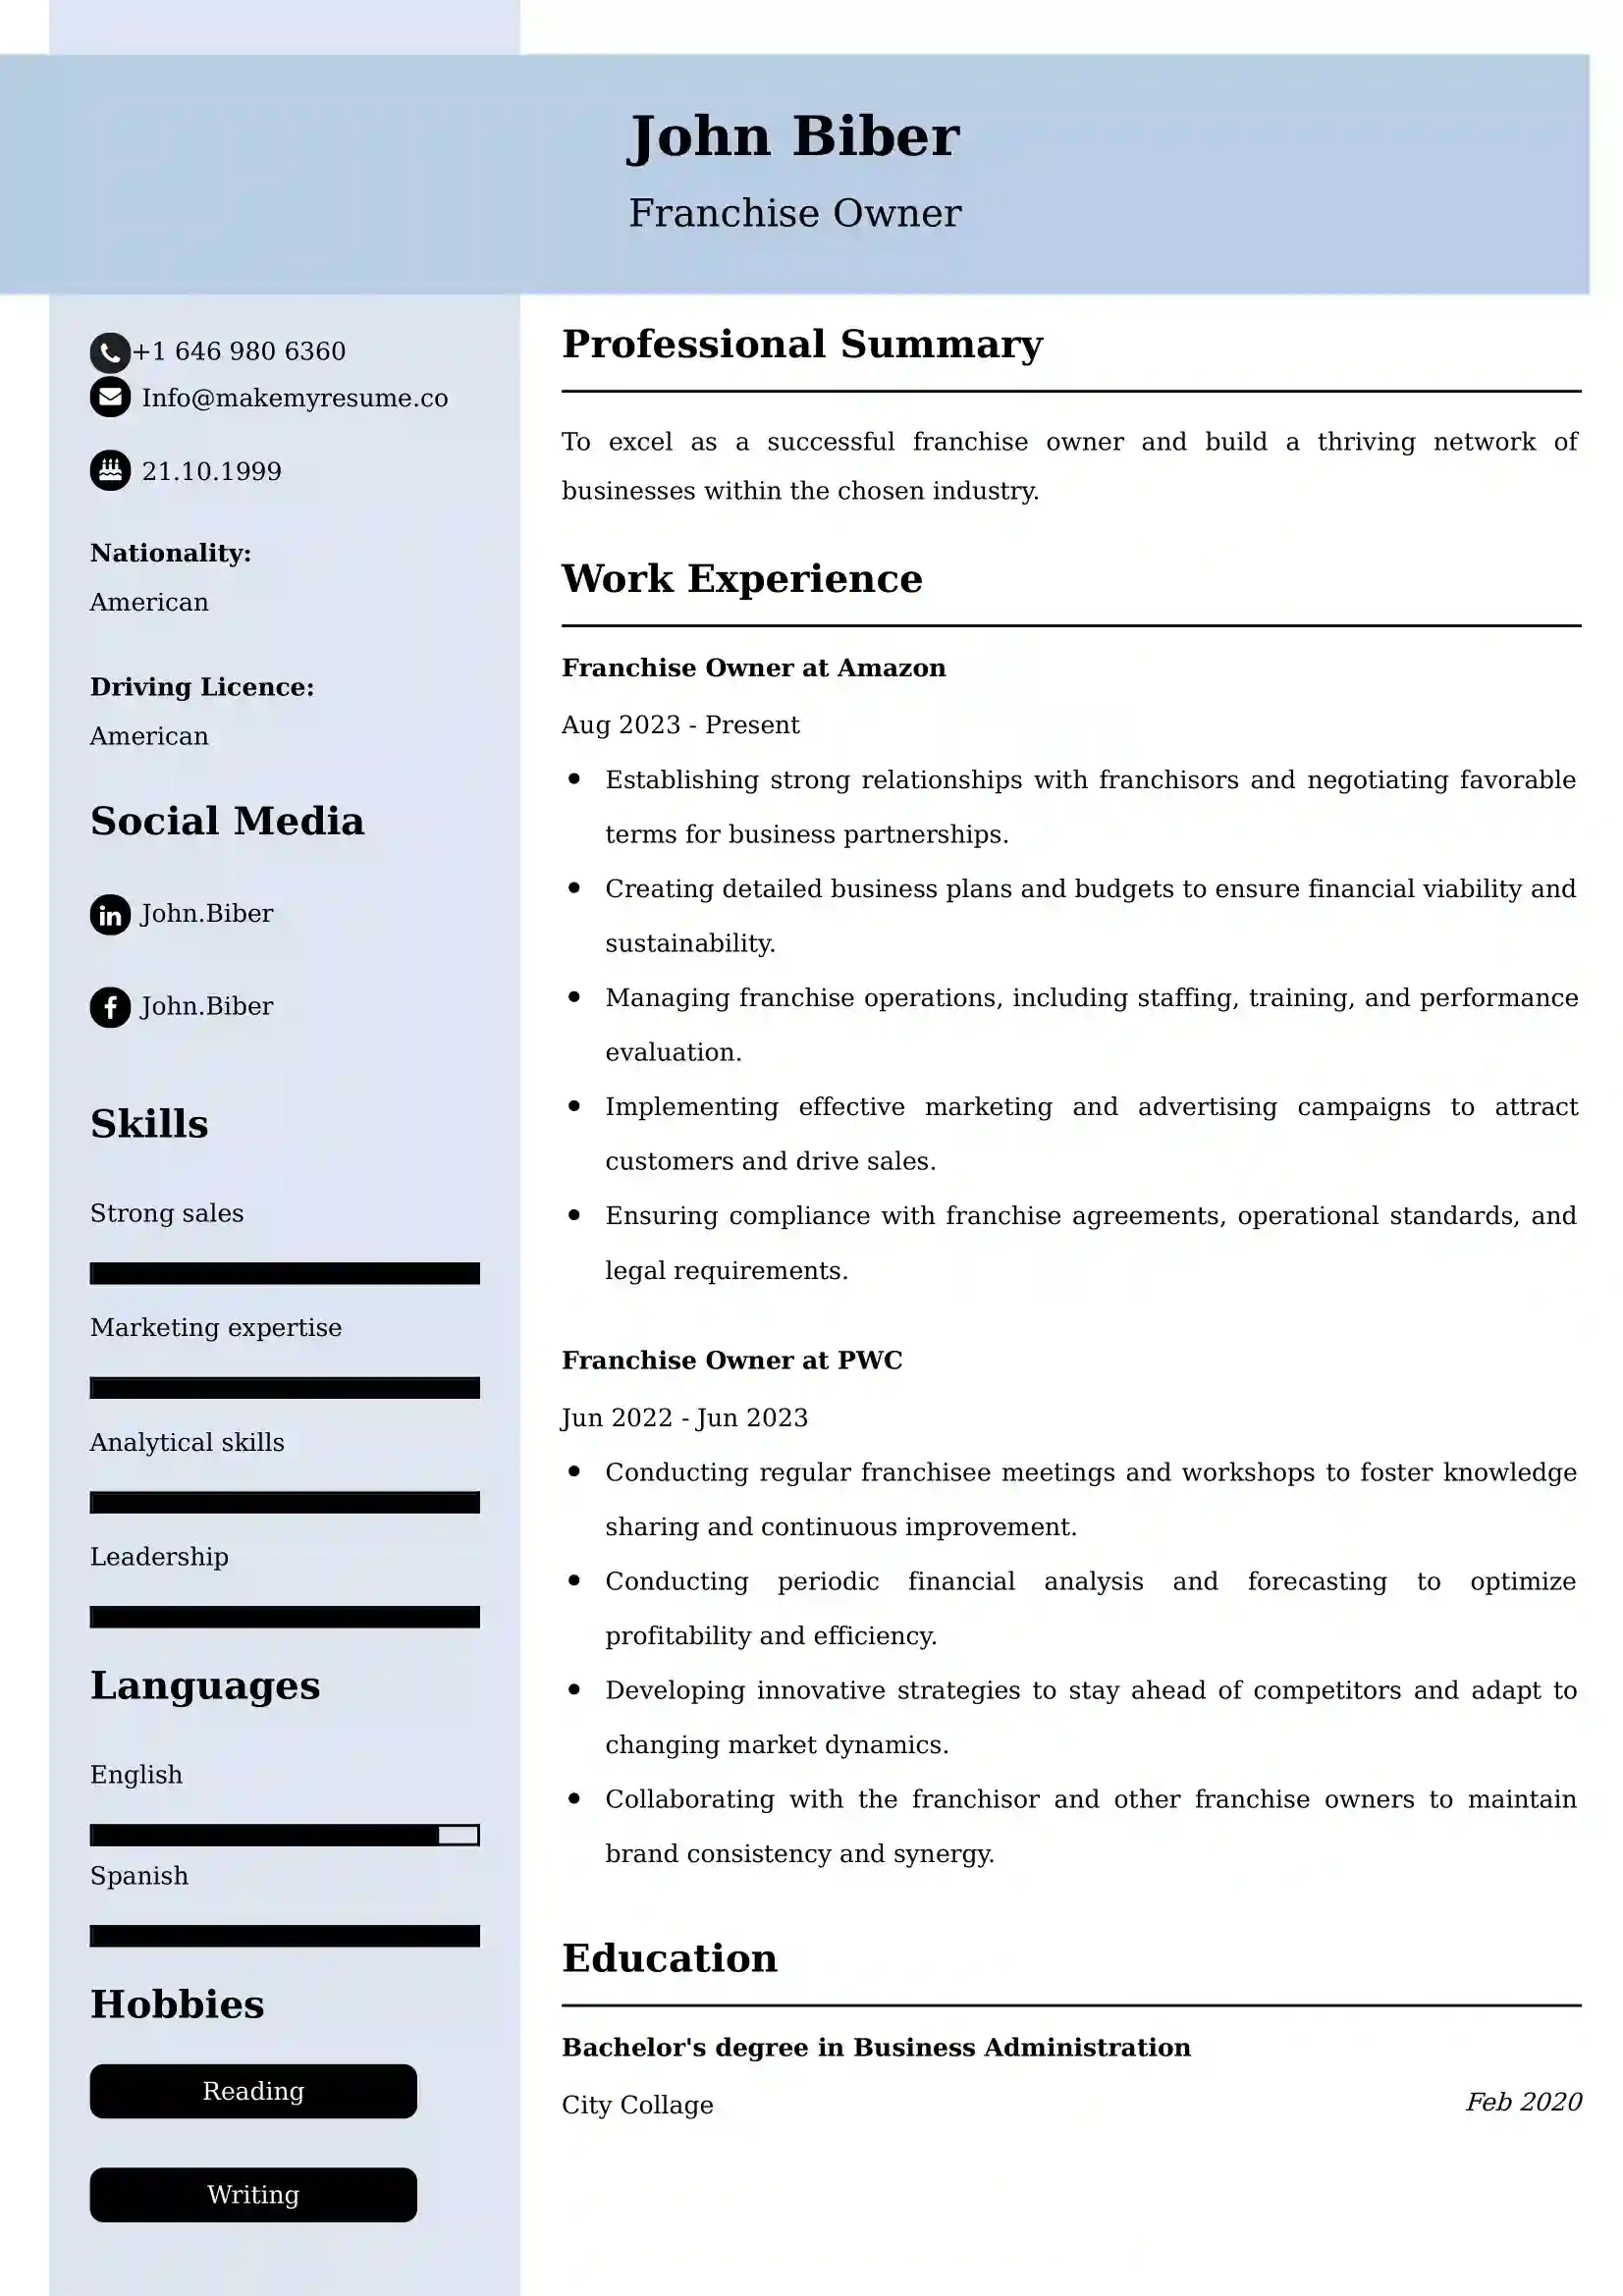 Franchise Owner Resume Examples - Brazilian Format, Latest Template